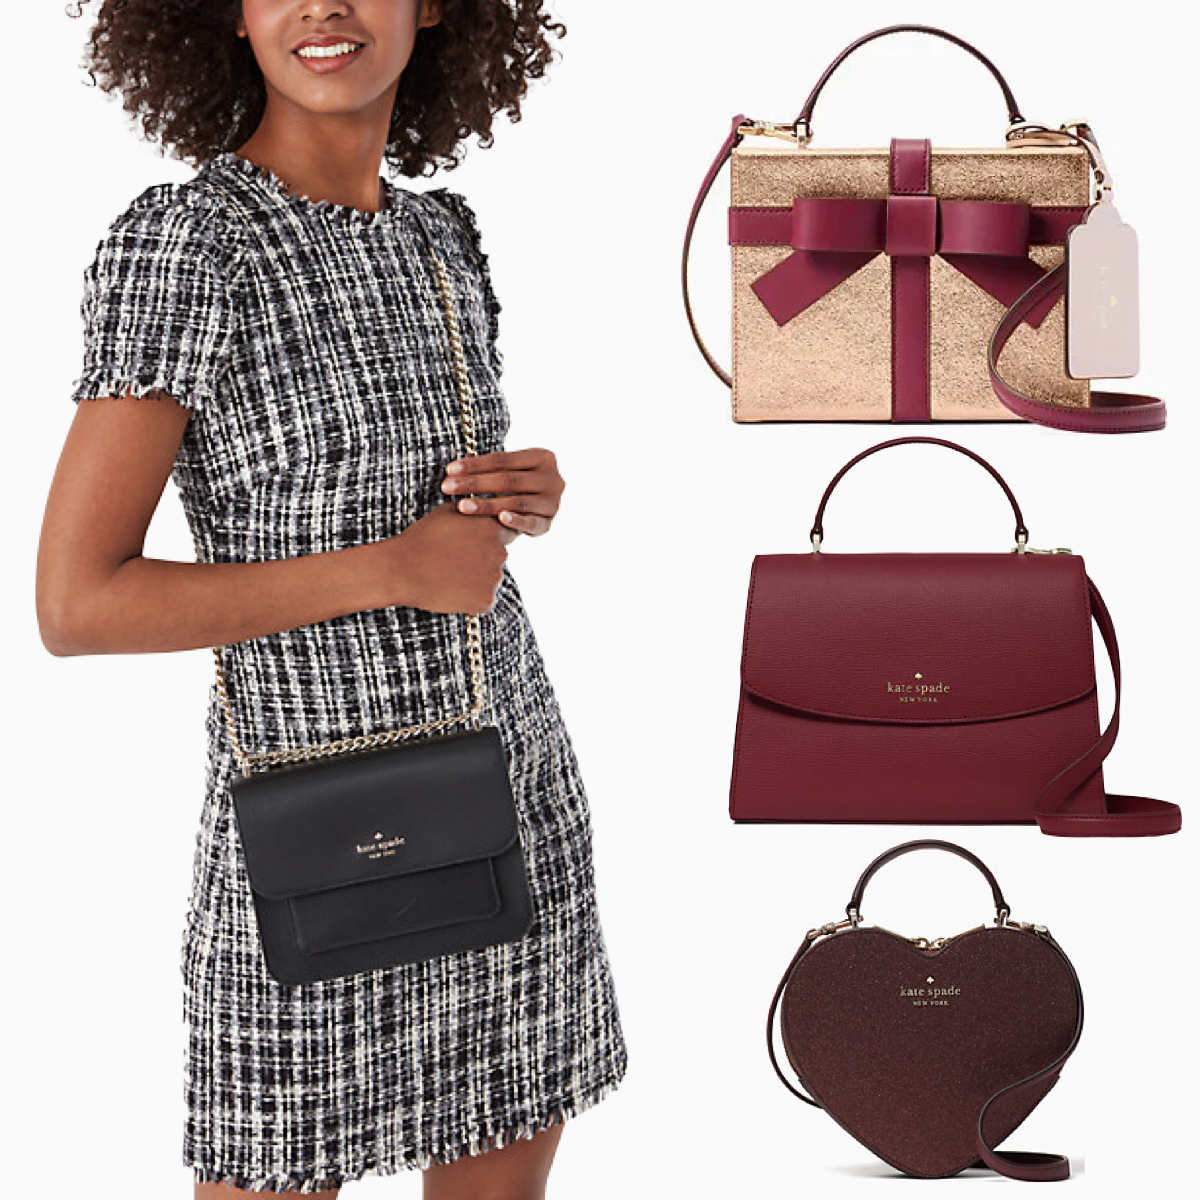 Kate Spade Sale: Take Up to 75% Off Everything & Get a Free Tote! - E!  Online